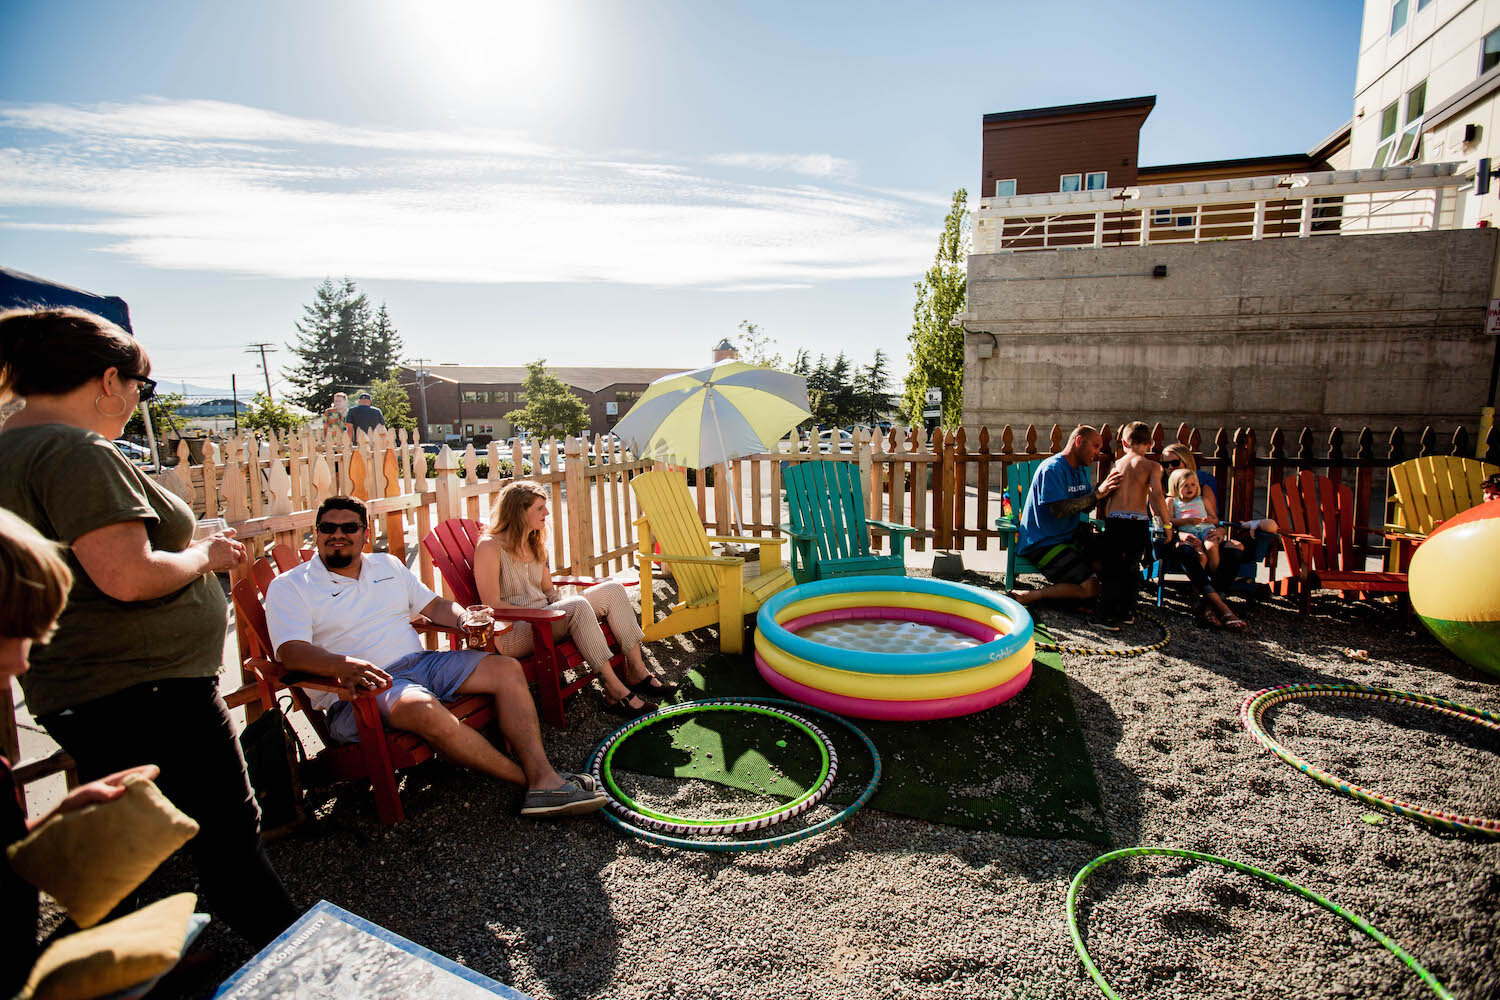 Folks enjoying dipping their toes in kiddie pools on a hot summer day during our Citra Vibes Shindig in the Garden in Summer 2019.